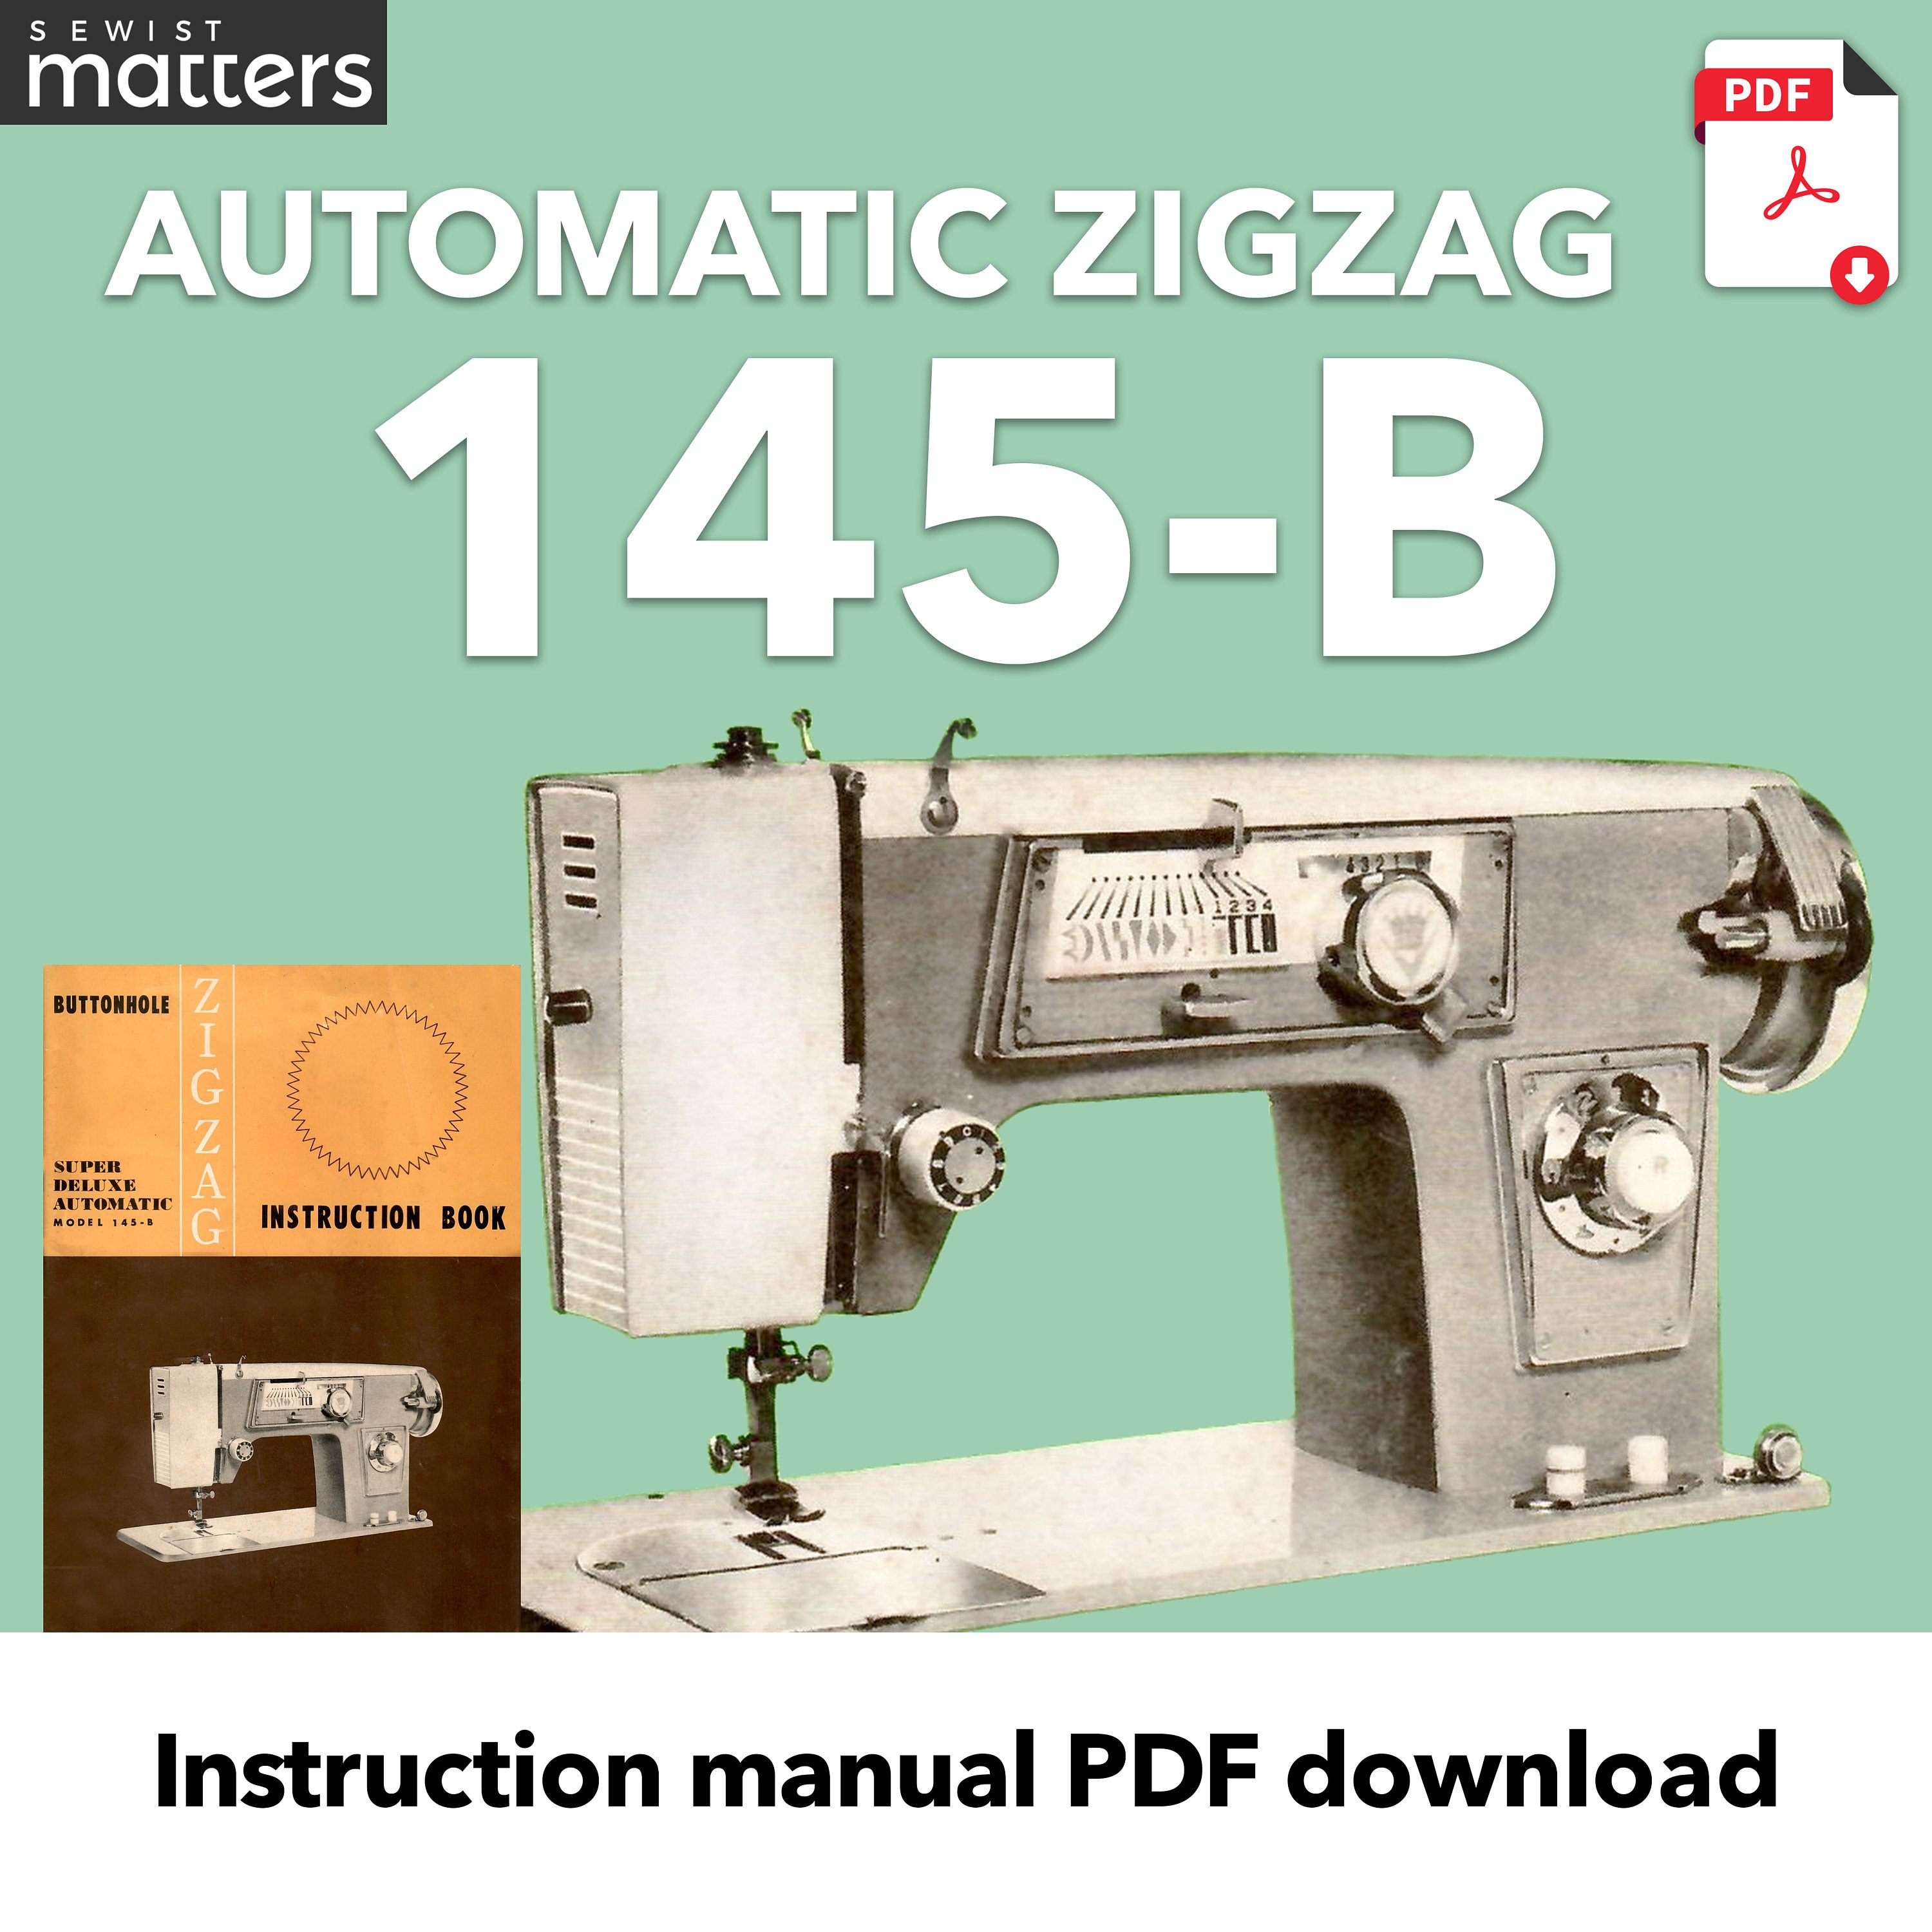 Nelco DE LUXE N-100 Zigzag Sewing Machine Instruction Book Manual PDF  Download -  Canada